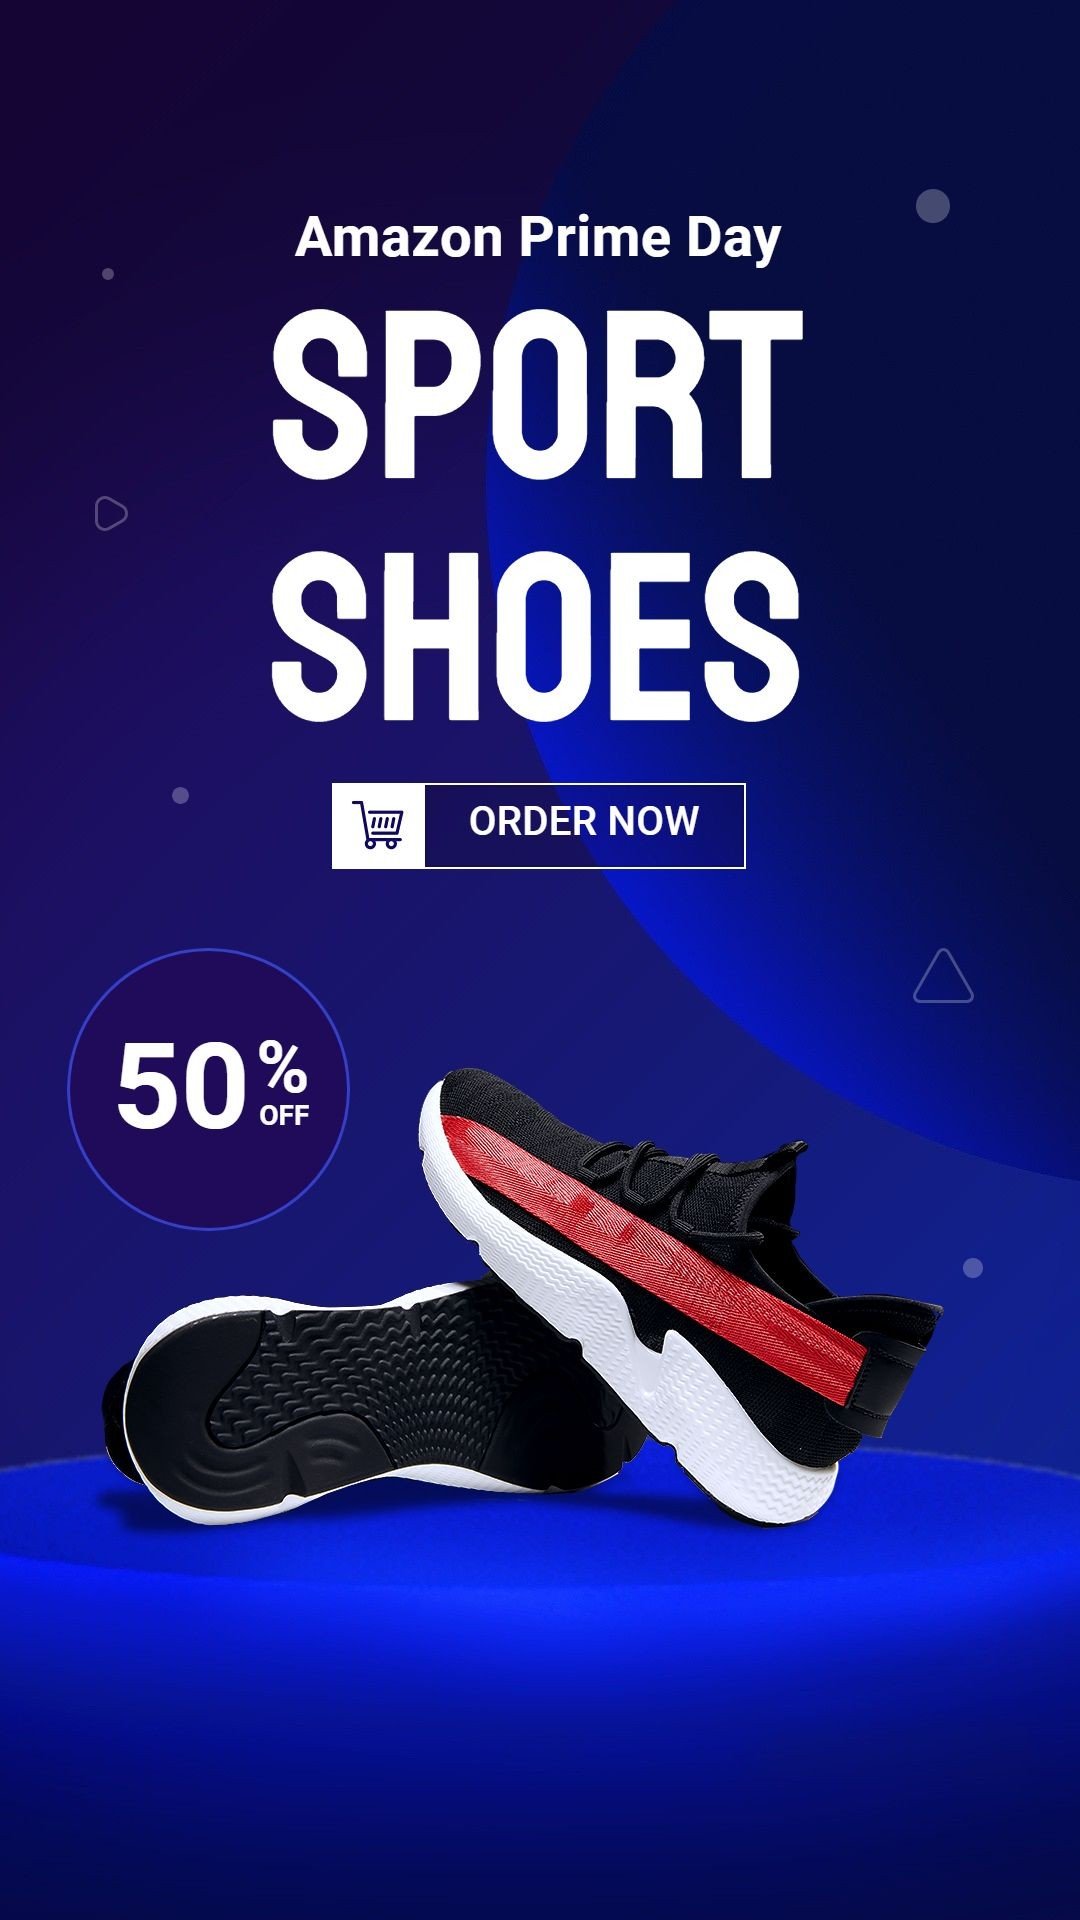 Amazon Prime Day Sports Running Shoes Discount Sale Promotion Ecommerce Story预览效果